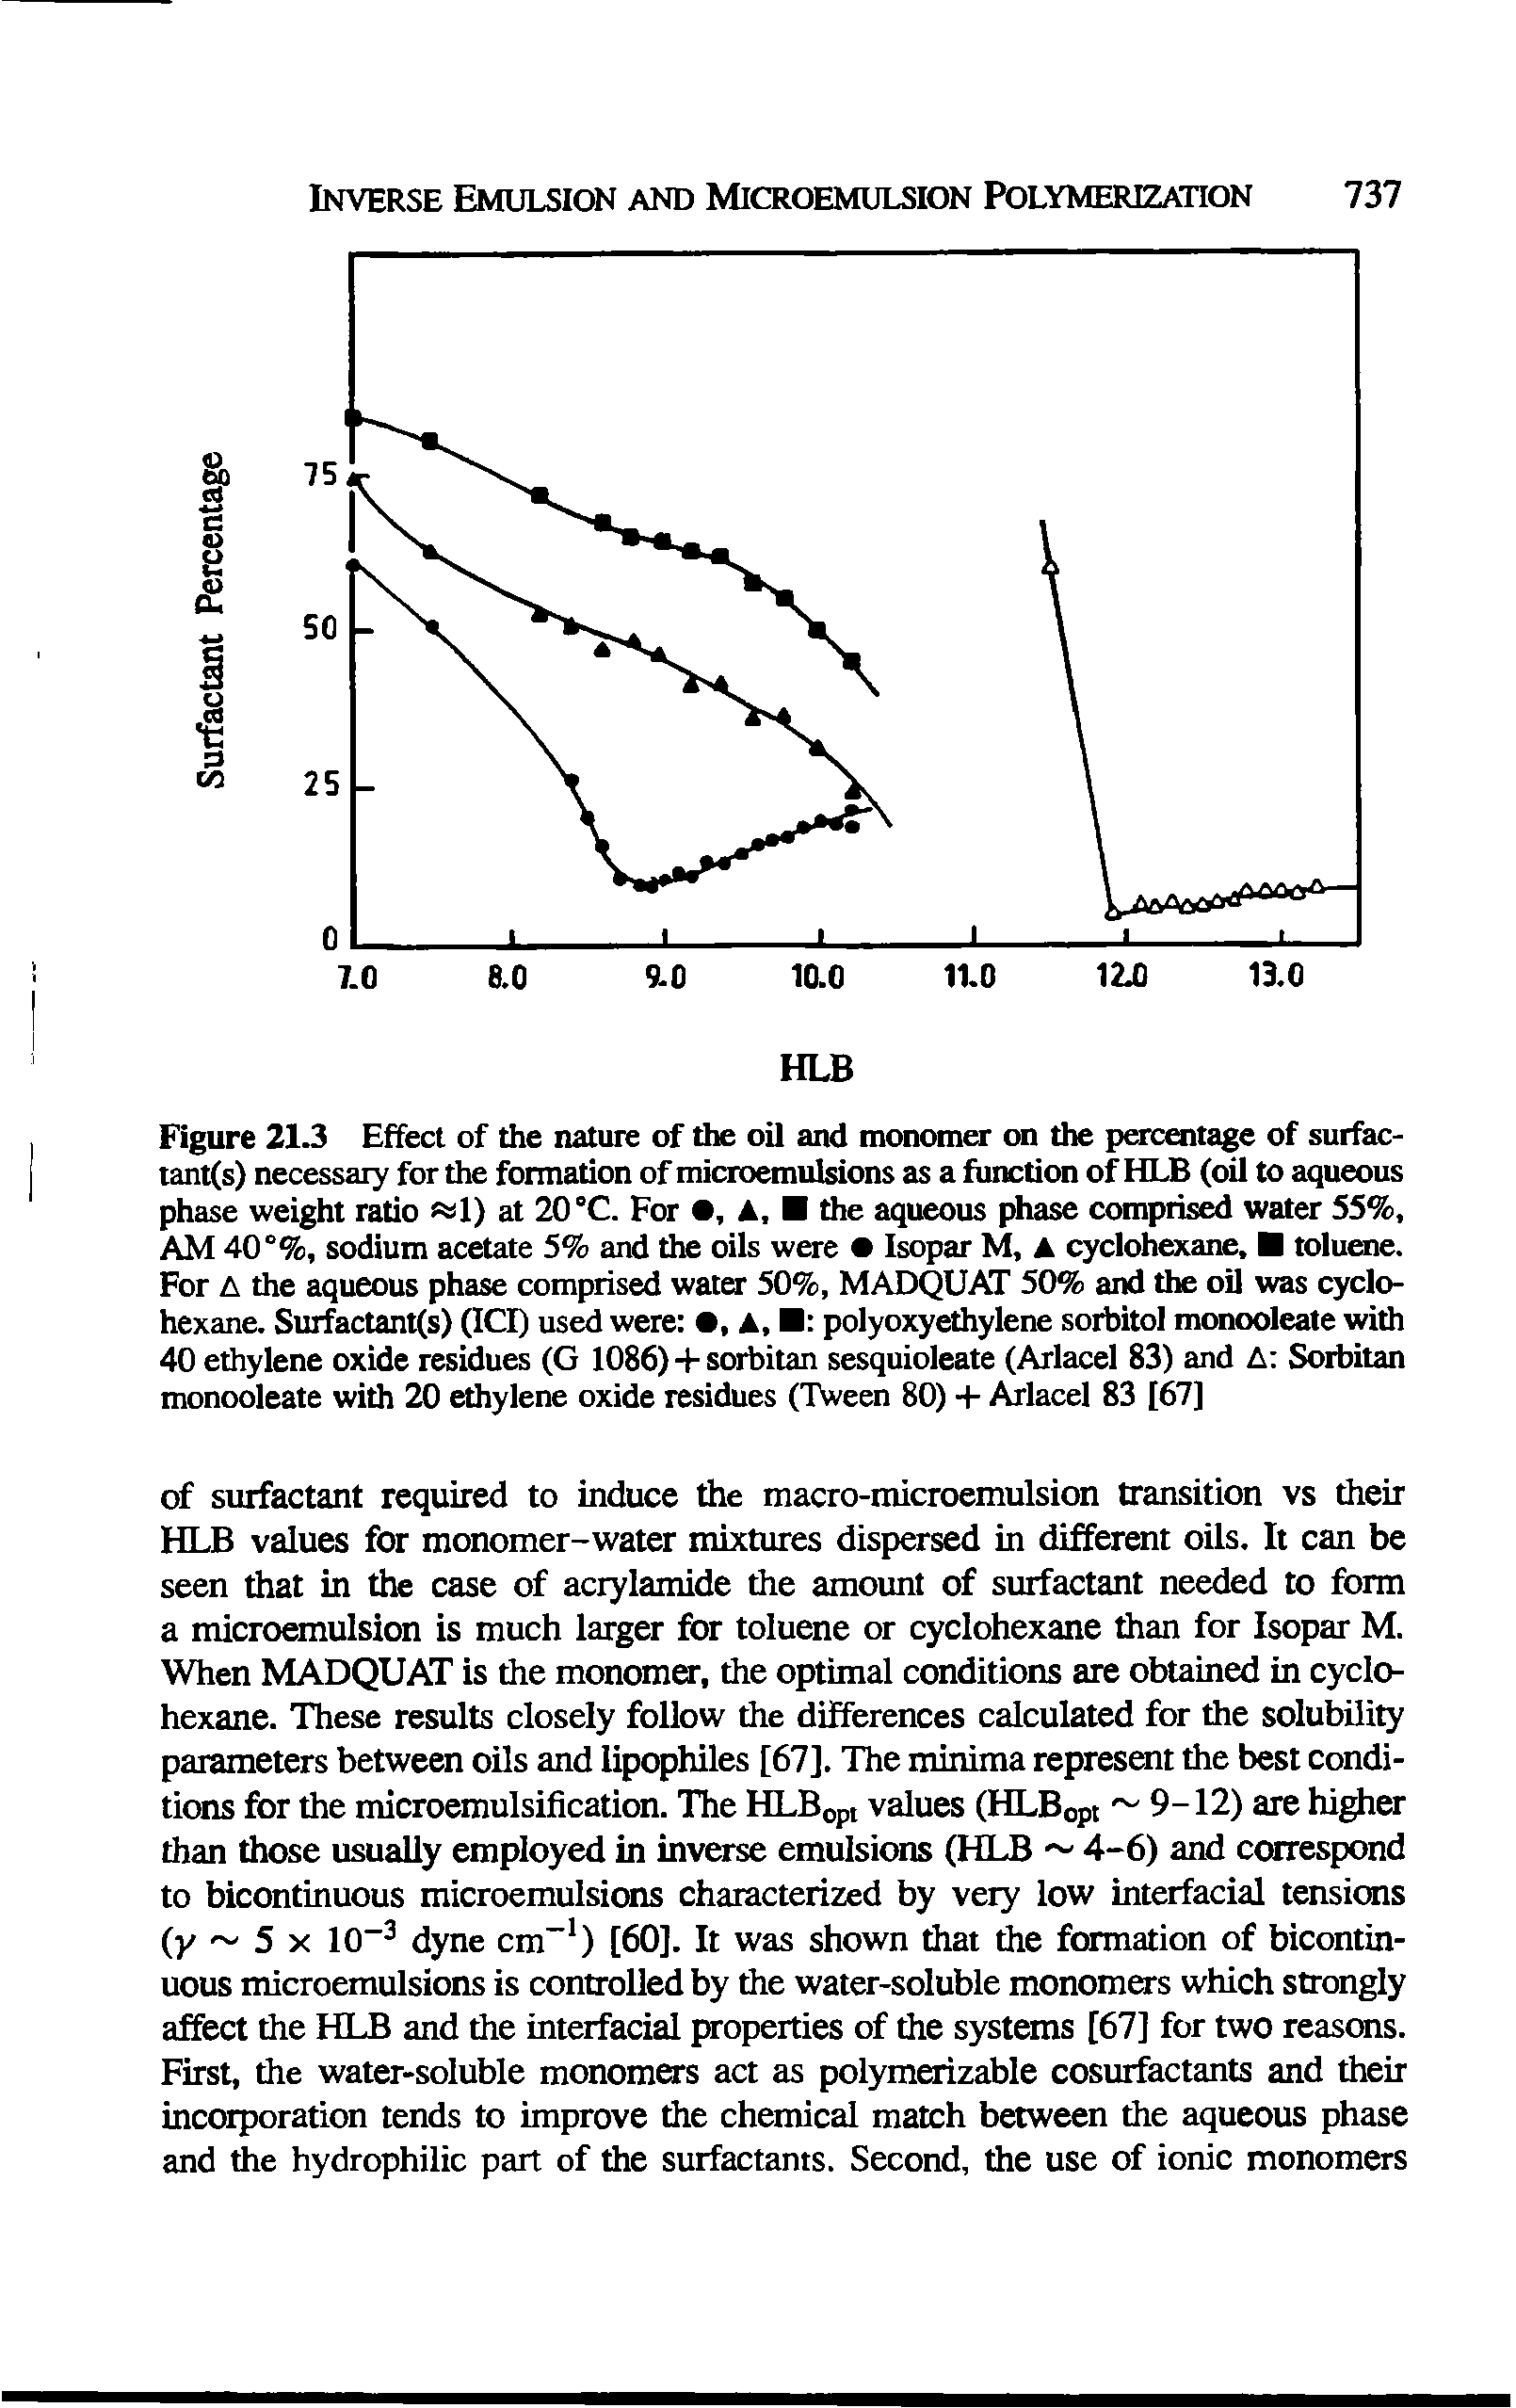 Figure 21.3 Effect of the nature of the oil and monomer on the percentage of surfac-tant(s) necessary for the formation of microemulsions as a function of HLB (oil to aqueous phase weight ratio 1) at 20 °C. For , A, the aqueous (diase comptis water 55%. AM 40°%, sodium acetate 5% and the oils were Isopar M, a cyclohexane, toluene. For A the aqueous phase comprised water 50%, MADQUAT 50% and the oil was cyclohexane. Suifactant(s) GCI) used were , A. polyoxyethylene sorbitol monooleate with 40 ethylene oxide residues (G 1086)+sorbitan sesquioleate (Arlacel 83) and A Soibitan monooleate with 20 ethylene oxide residues (Tween 80) + Arlacel 83 [67]...